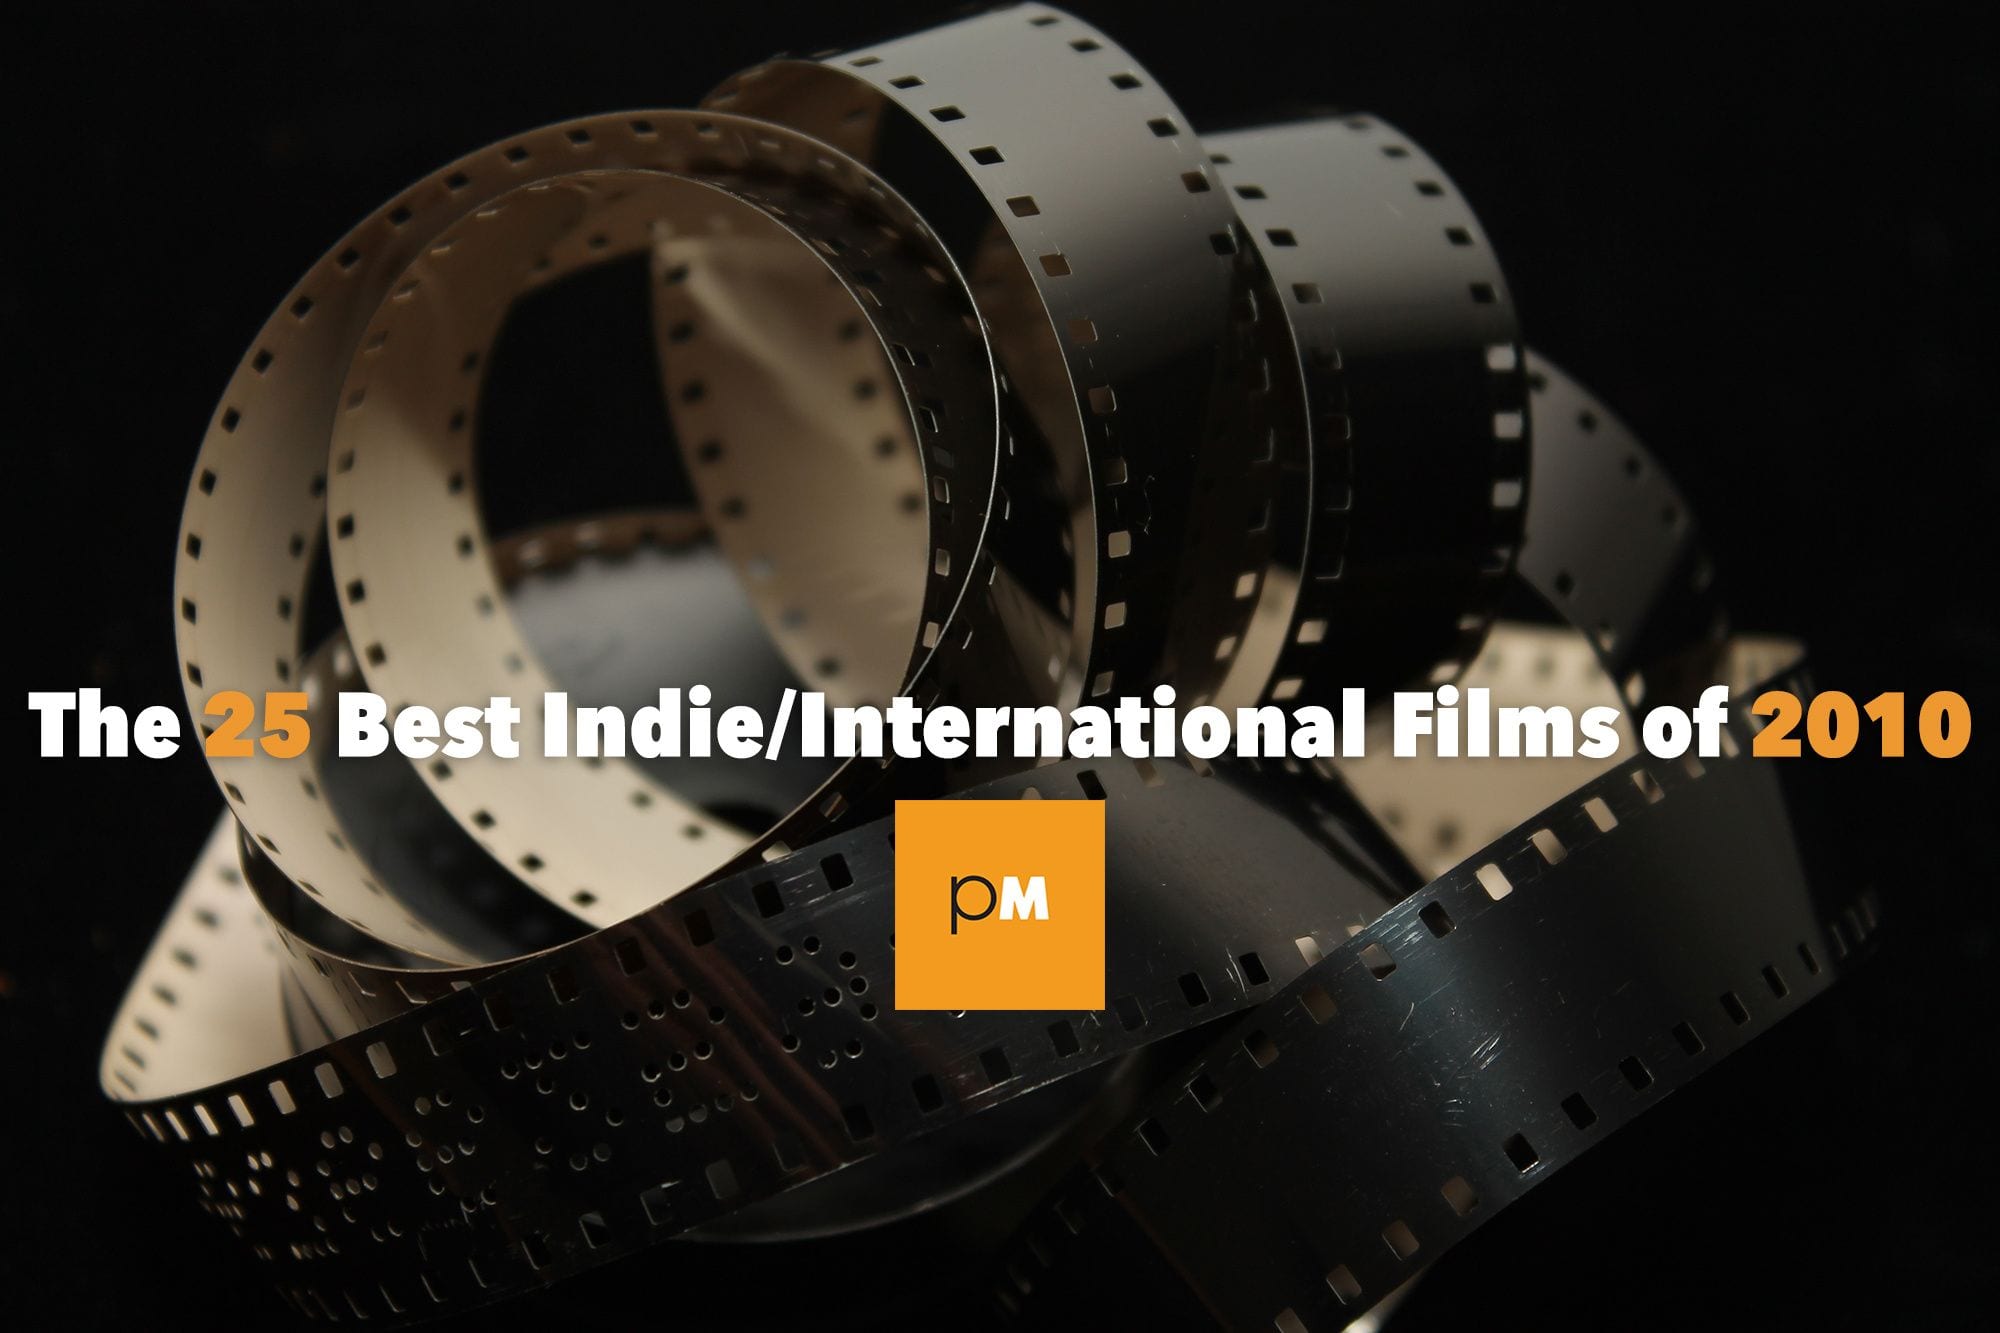 The 25 Best Independent / International Films of 2010